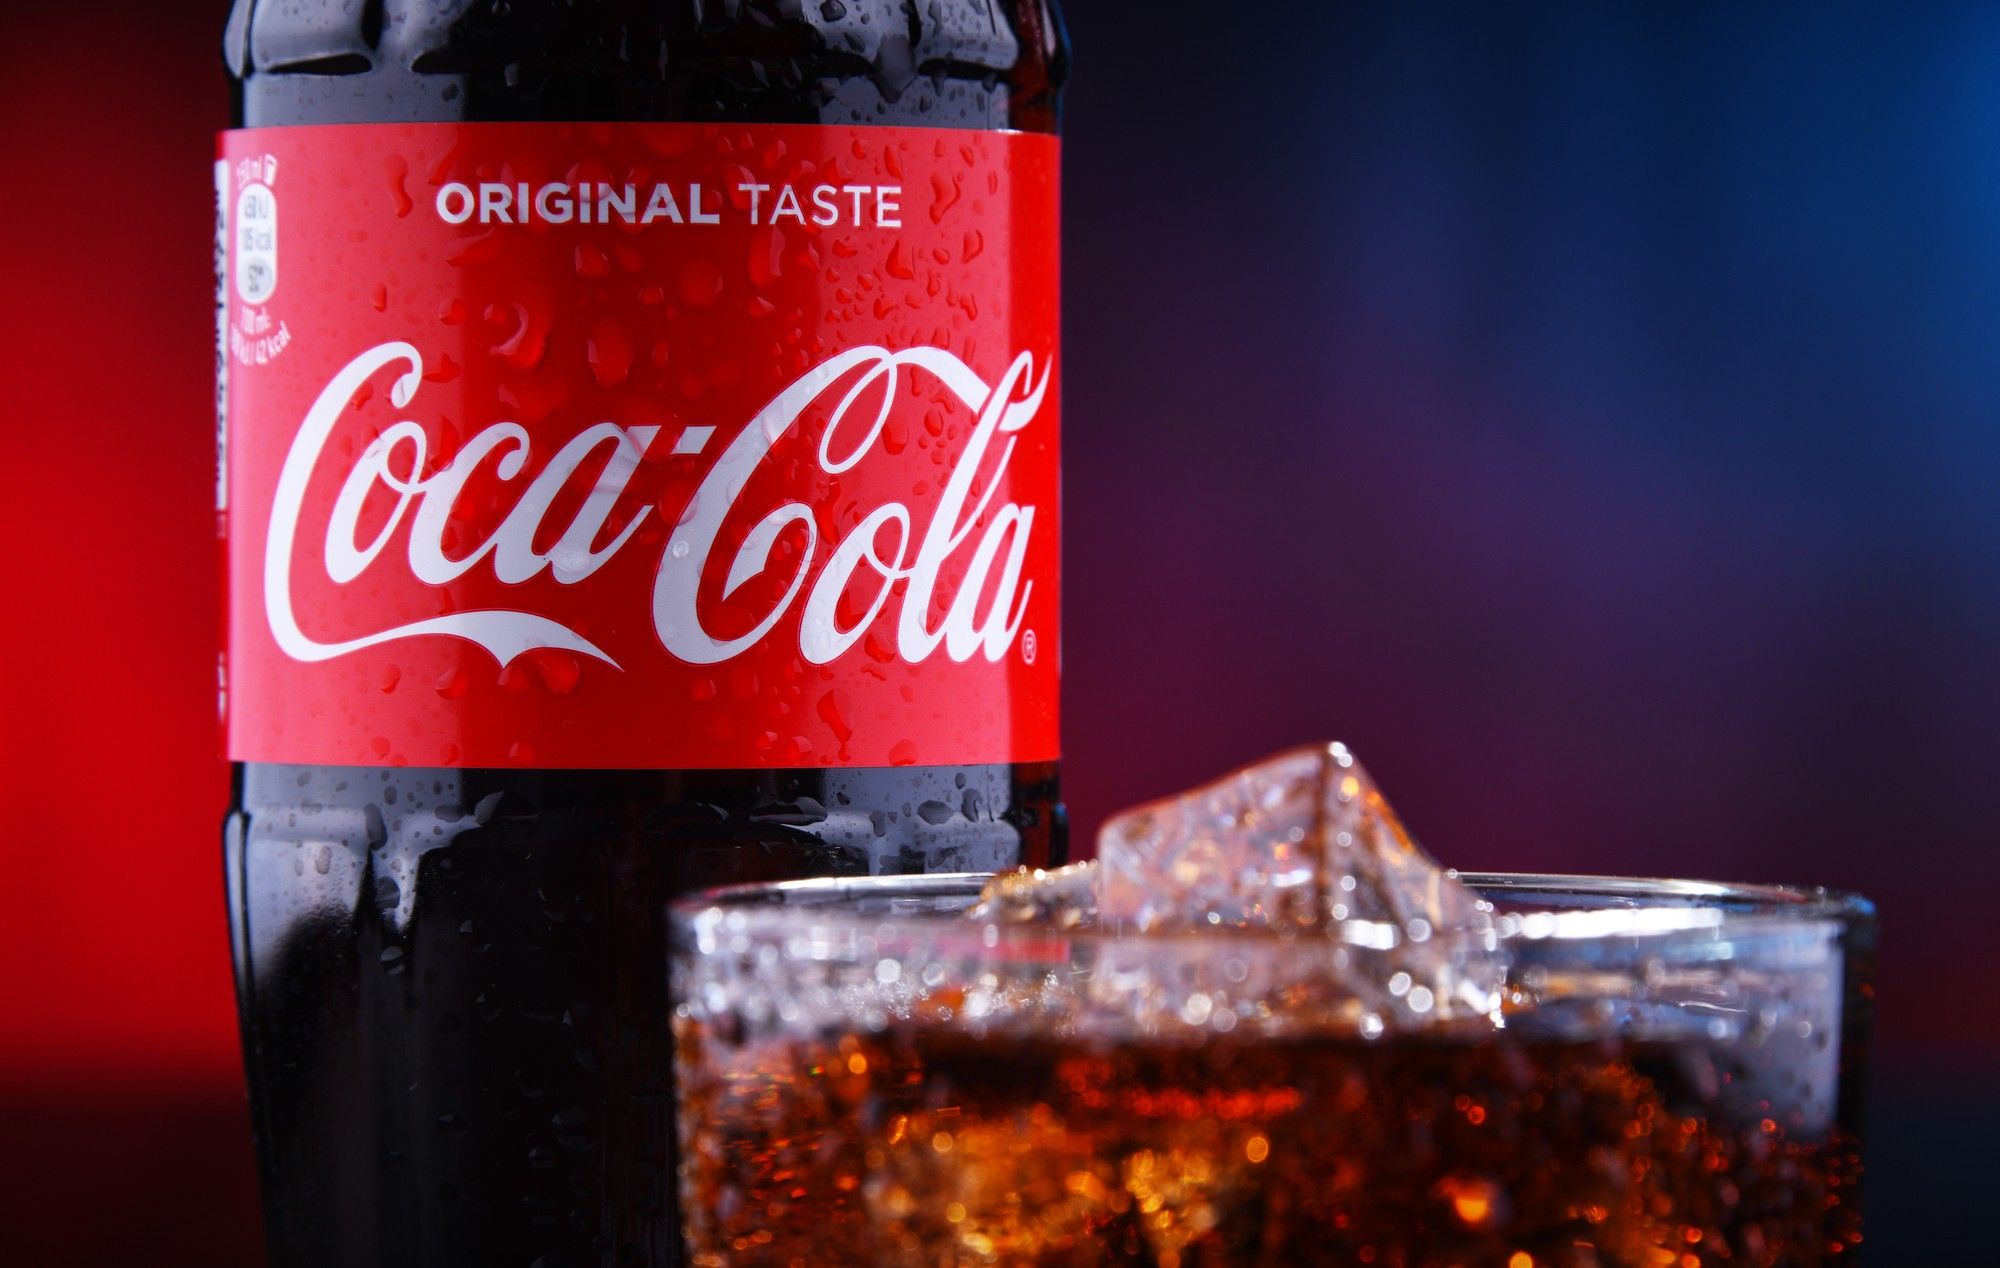 Vanilla Coca-Cola is allegedly not flavored with real vanilla.